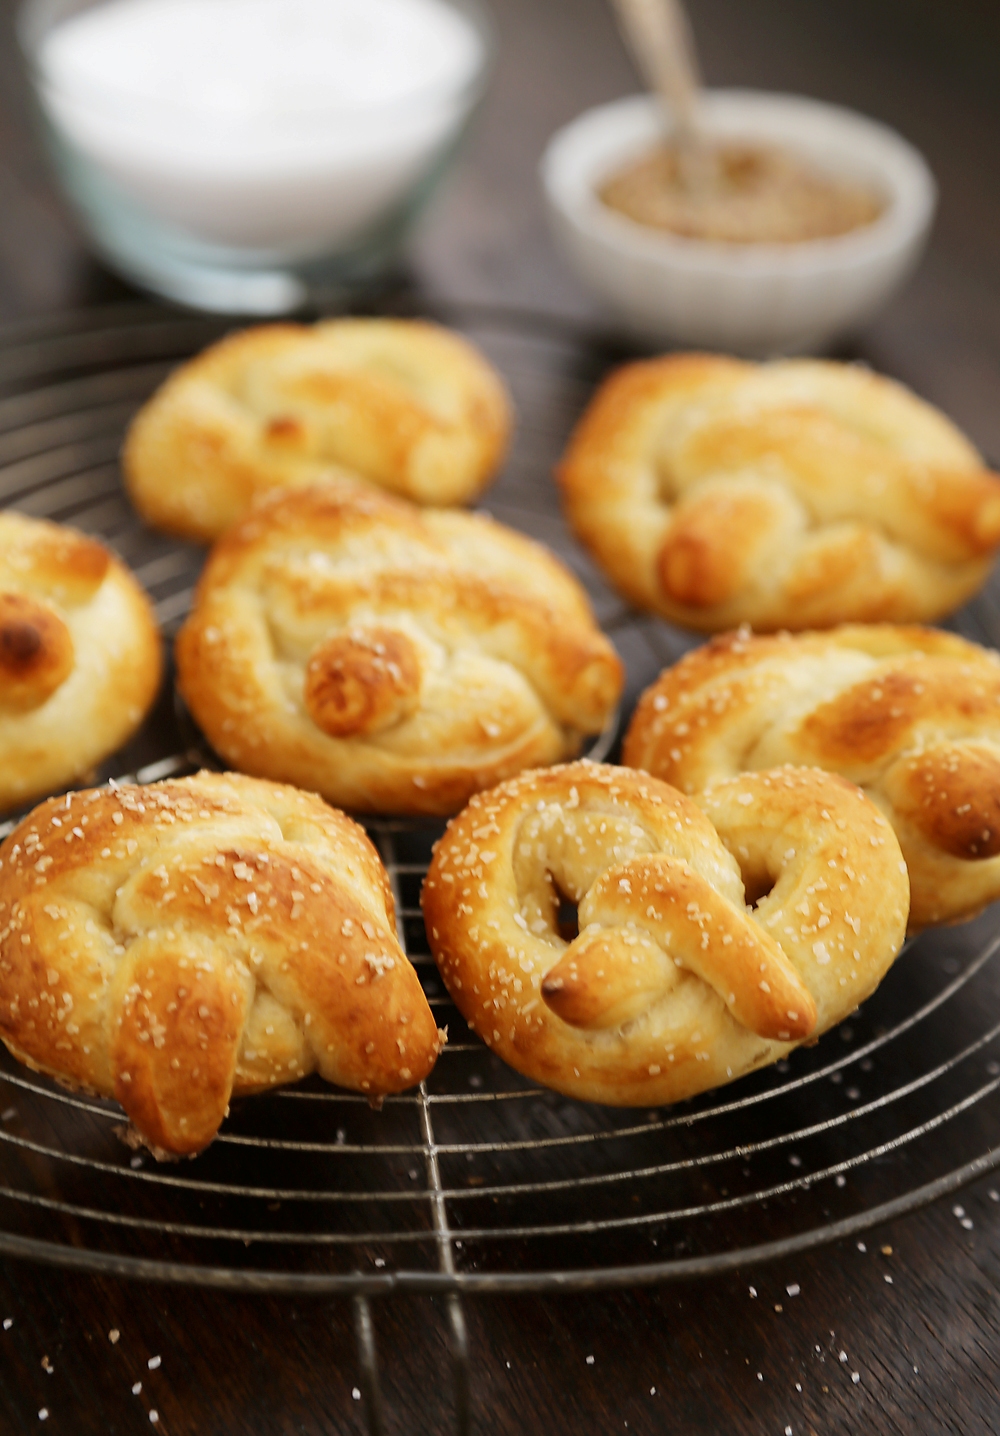 Easy Mini Soft Pretzels + Cheese Sauce – Fluffy, salty pretzels made quick + easy with pizza dough! Serve with spicy mustard or a homemade cheese sauce (recipe included). thecomfortofcooking.com